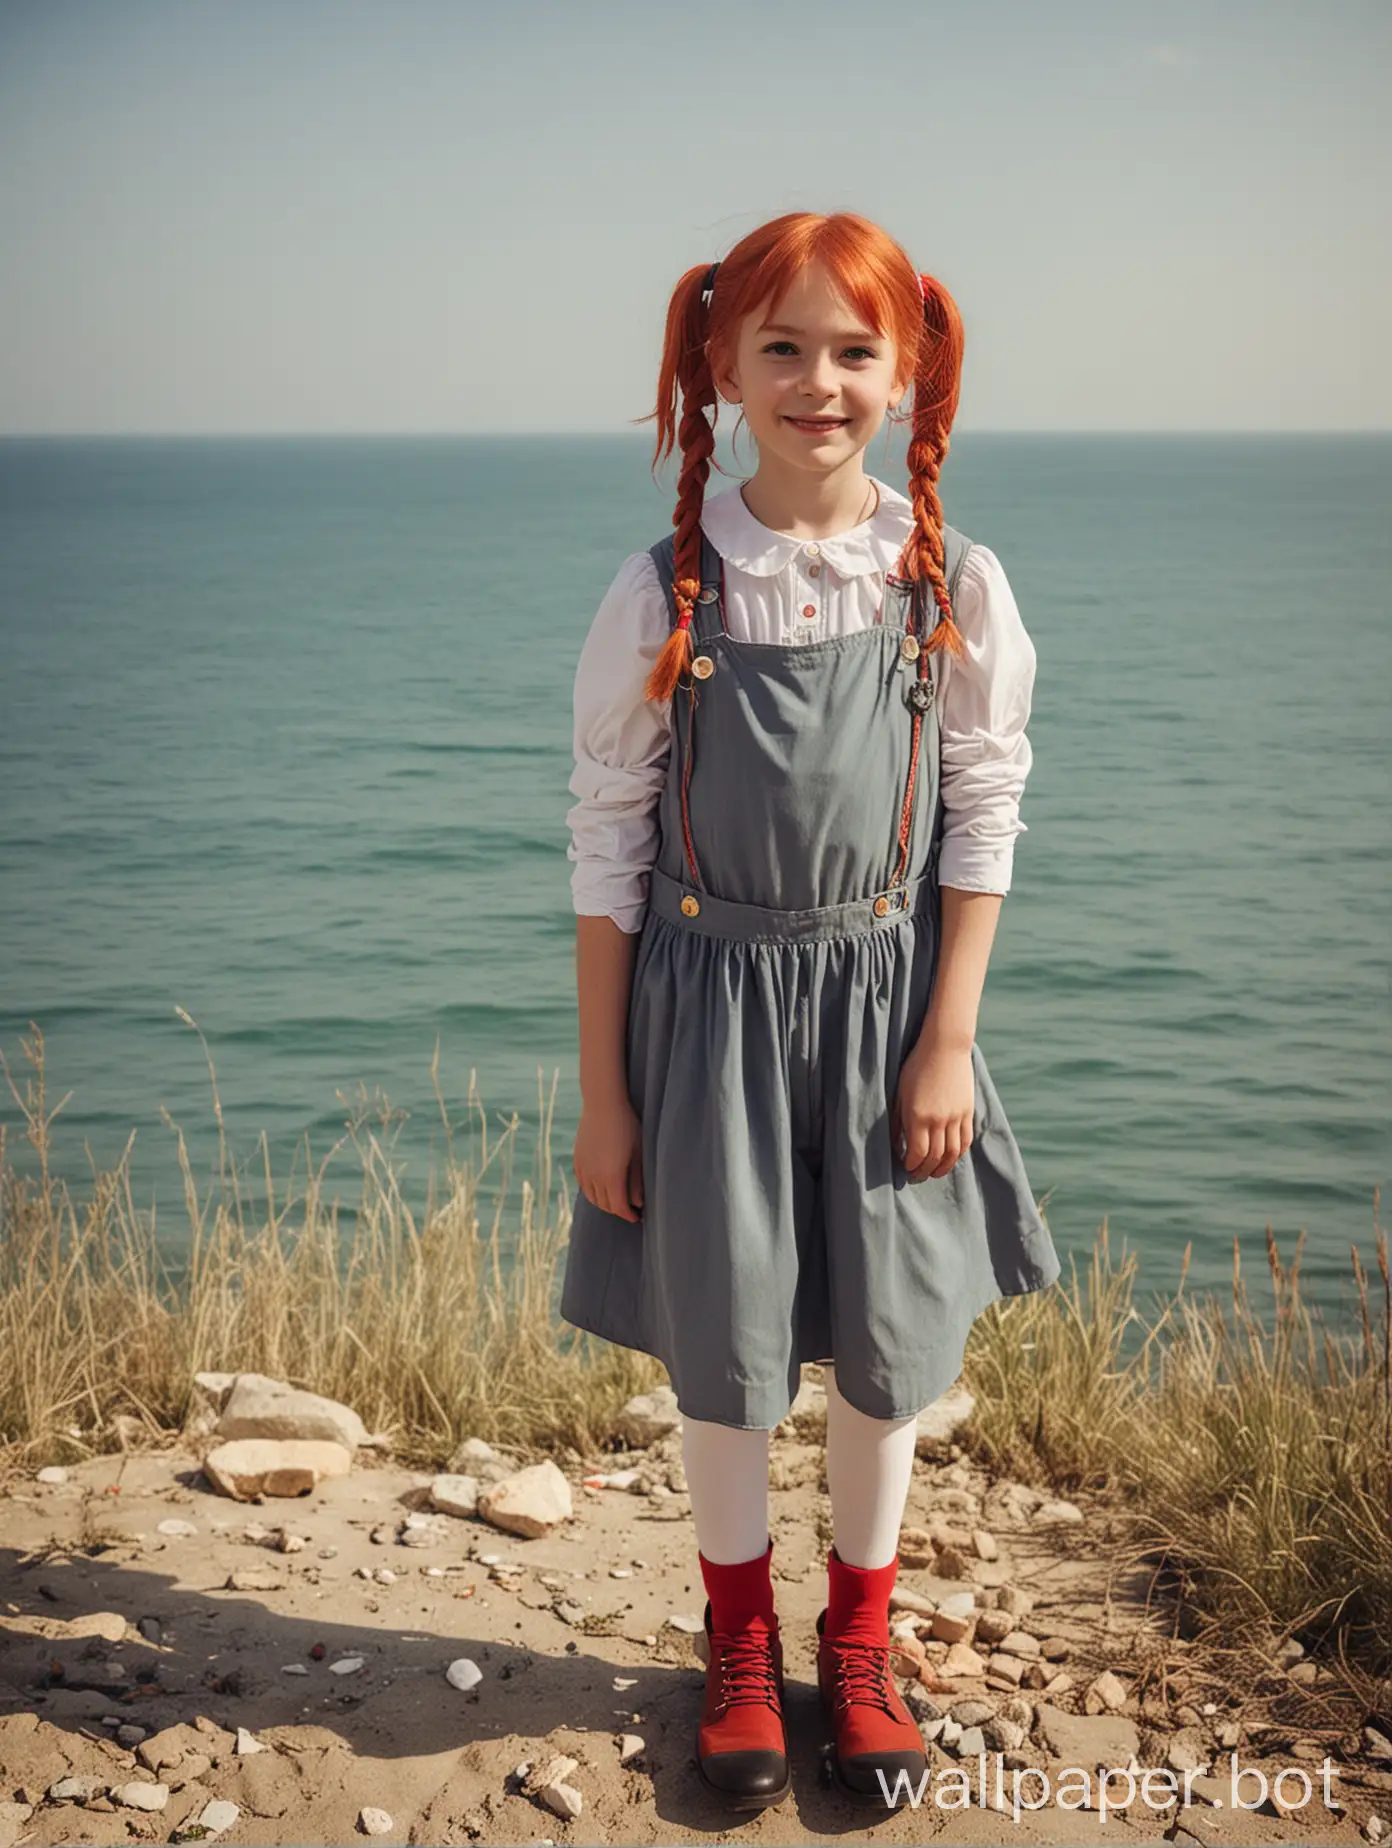 Cosplay-of-10YearOld-Girl-as-Pippi-Longstocking-with-Sea-View